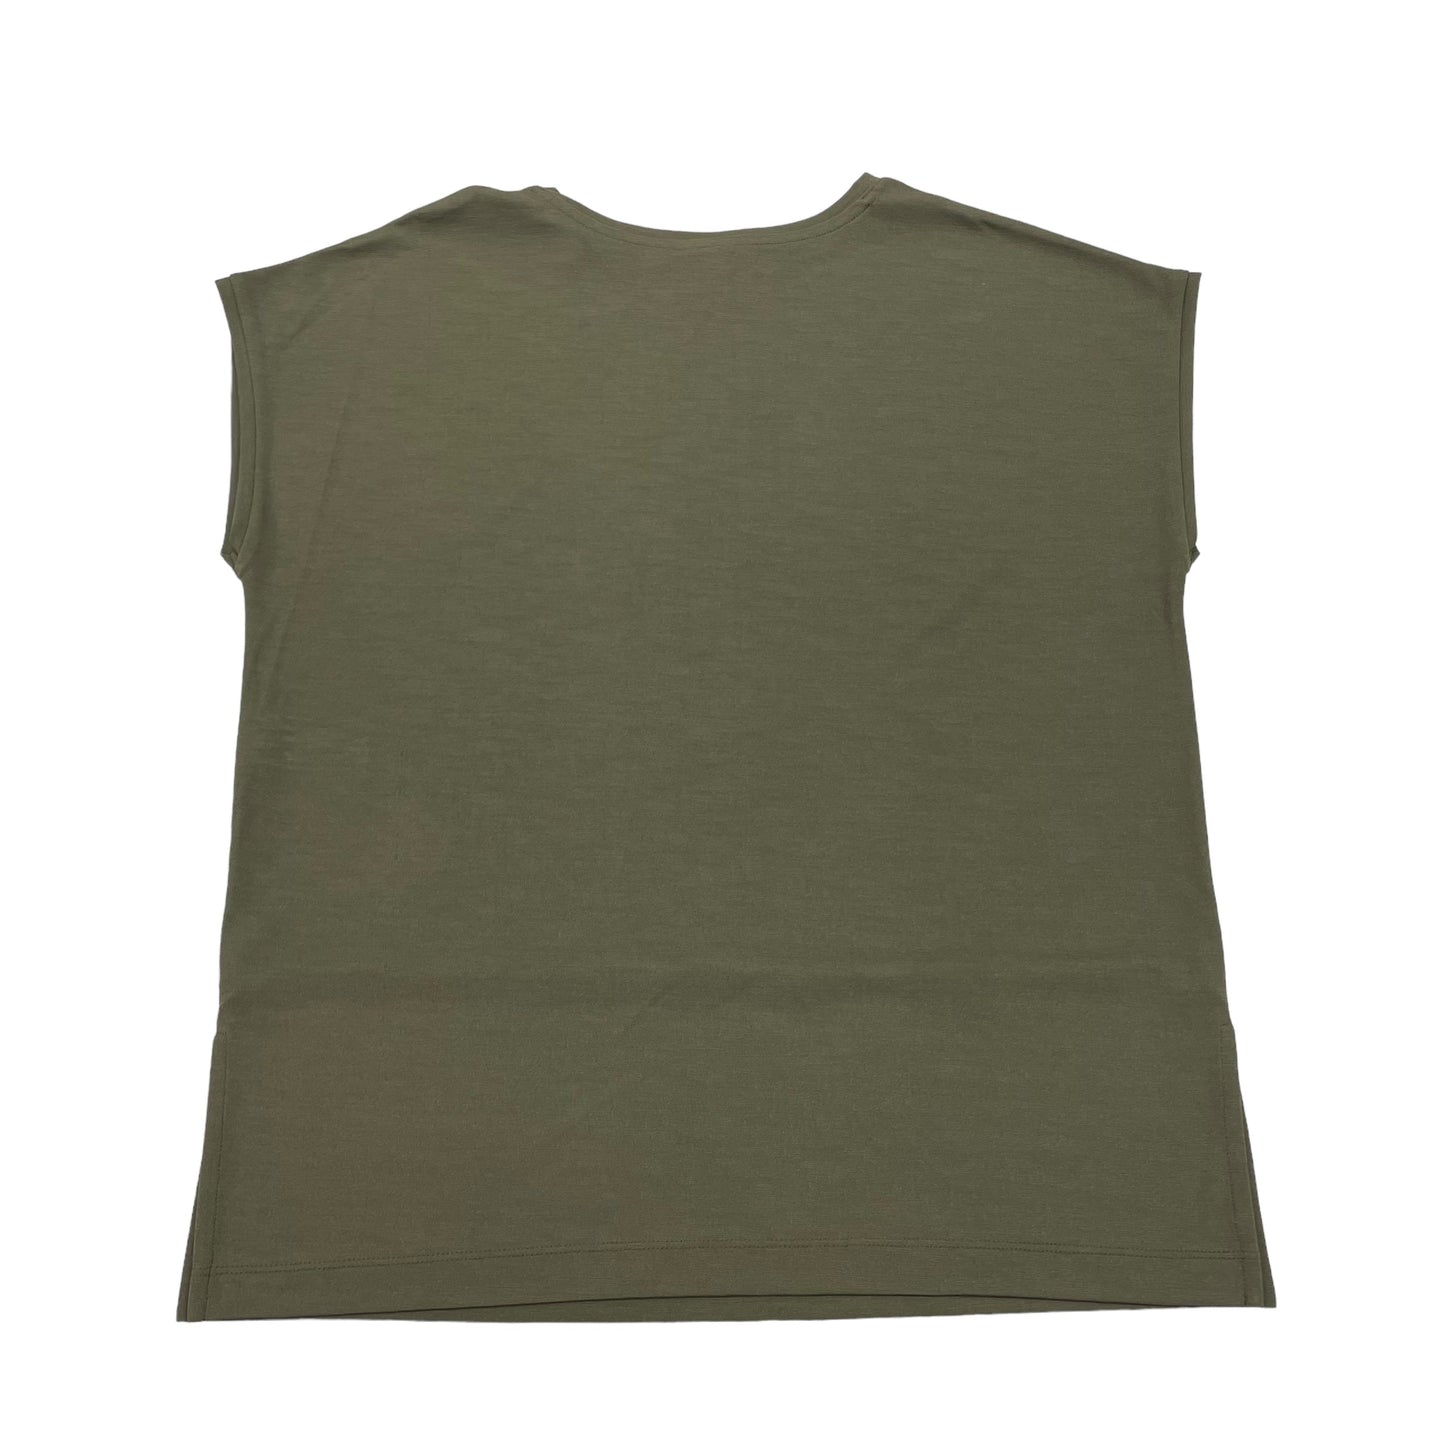 GREEN CHICOS TOP SS, Size M